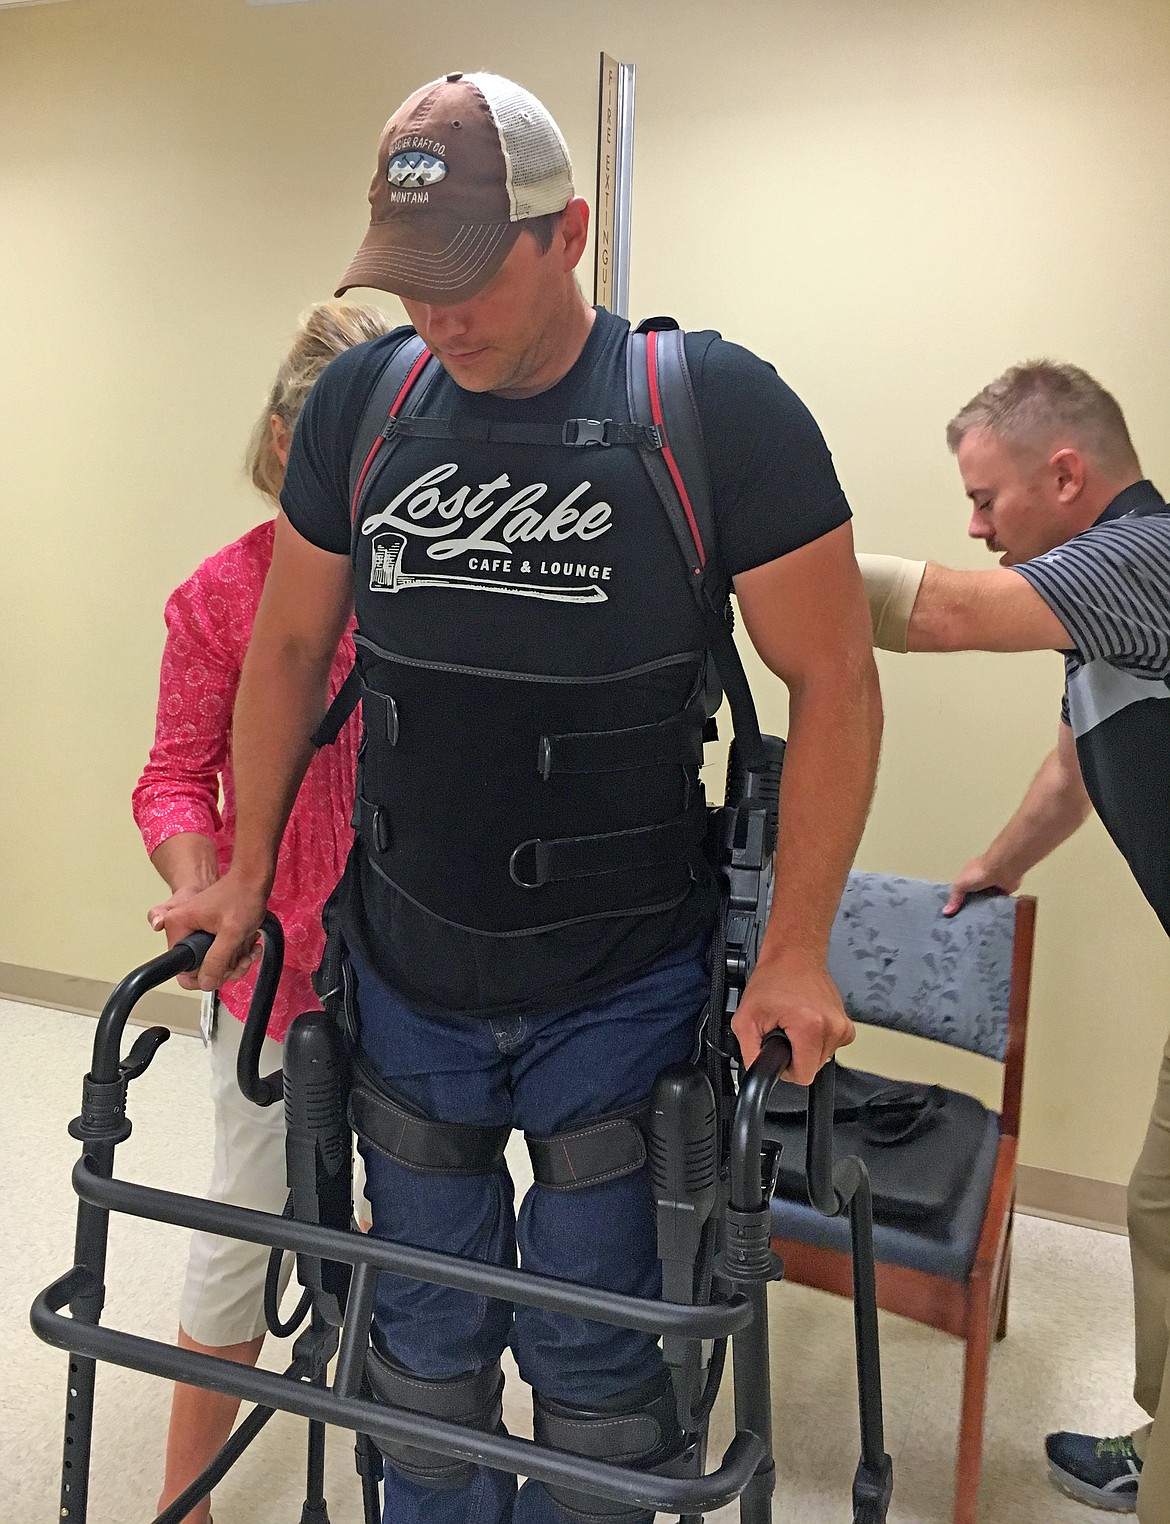 Chris Owens is pictured in an Exoskeleton — a state-of-the-art wearable robotic that assists in gait training and mobility for those who have lost their ability to walk due to stroke, injury, multiple sclerosis, and more. With the assistance of the Exoskeleton and wrist canes, Owens was able to walk for the first time in over a decade.